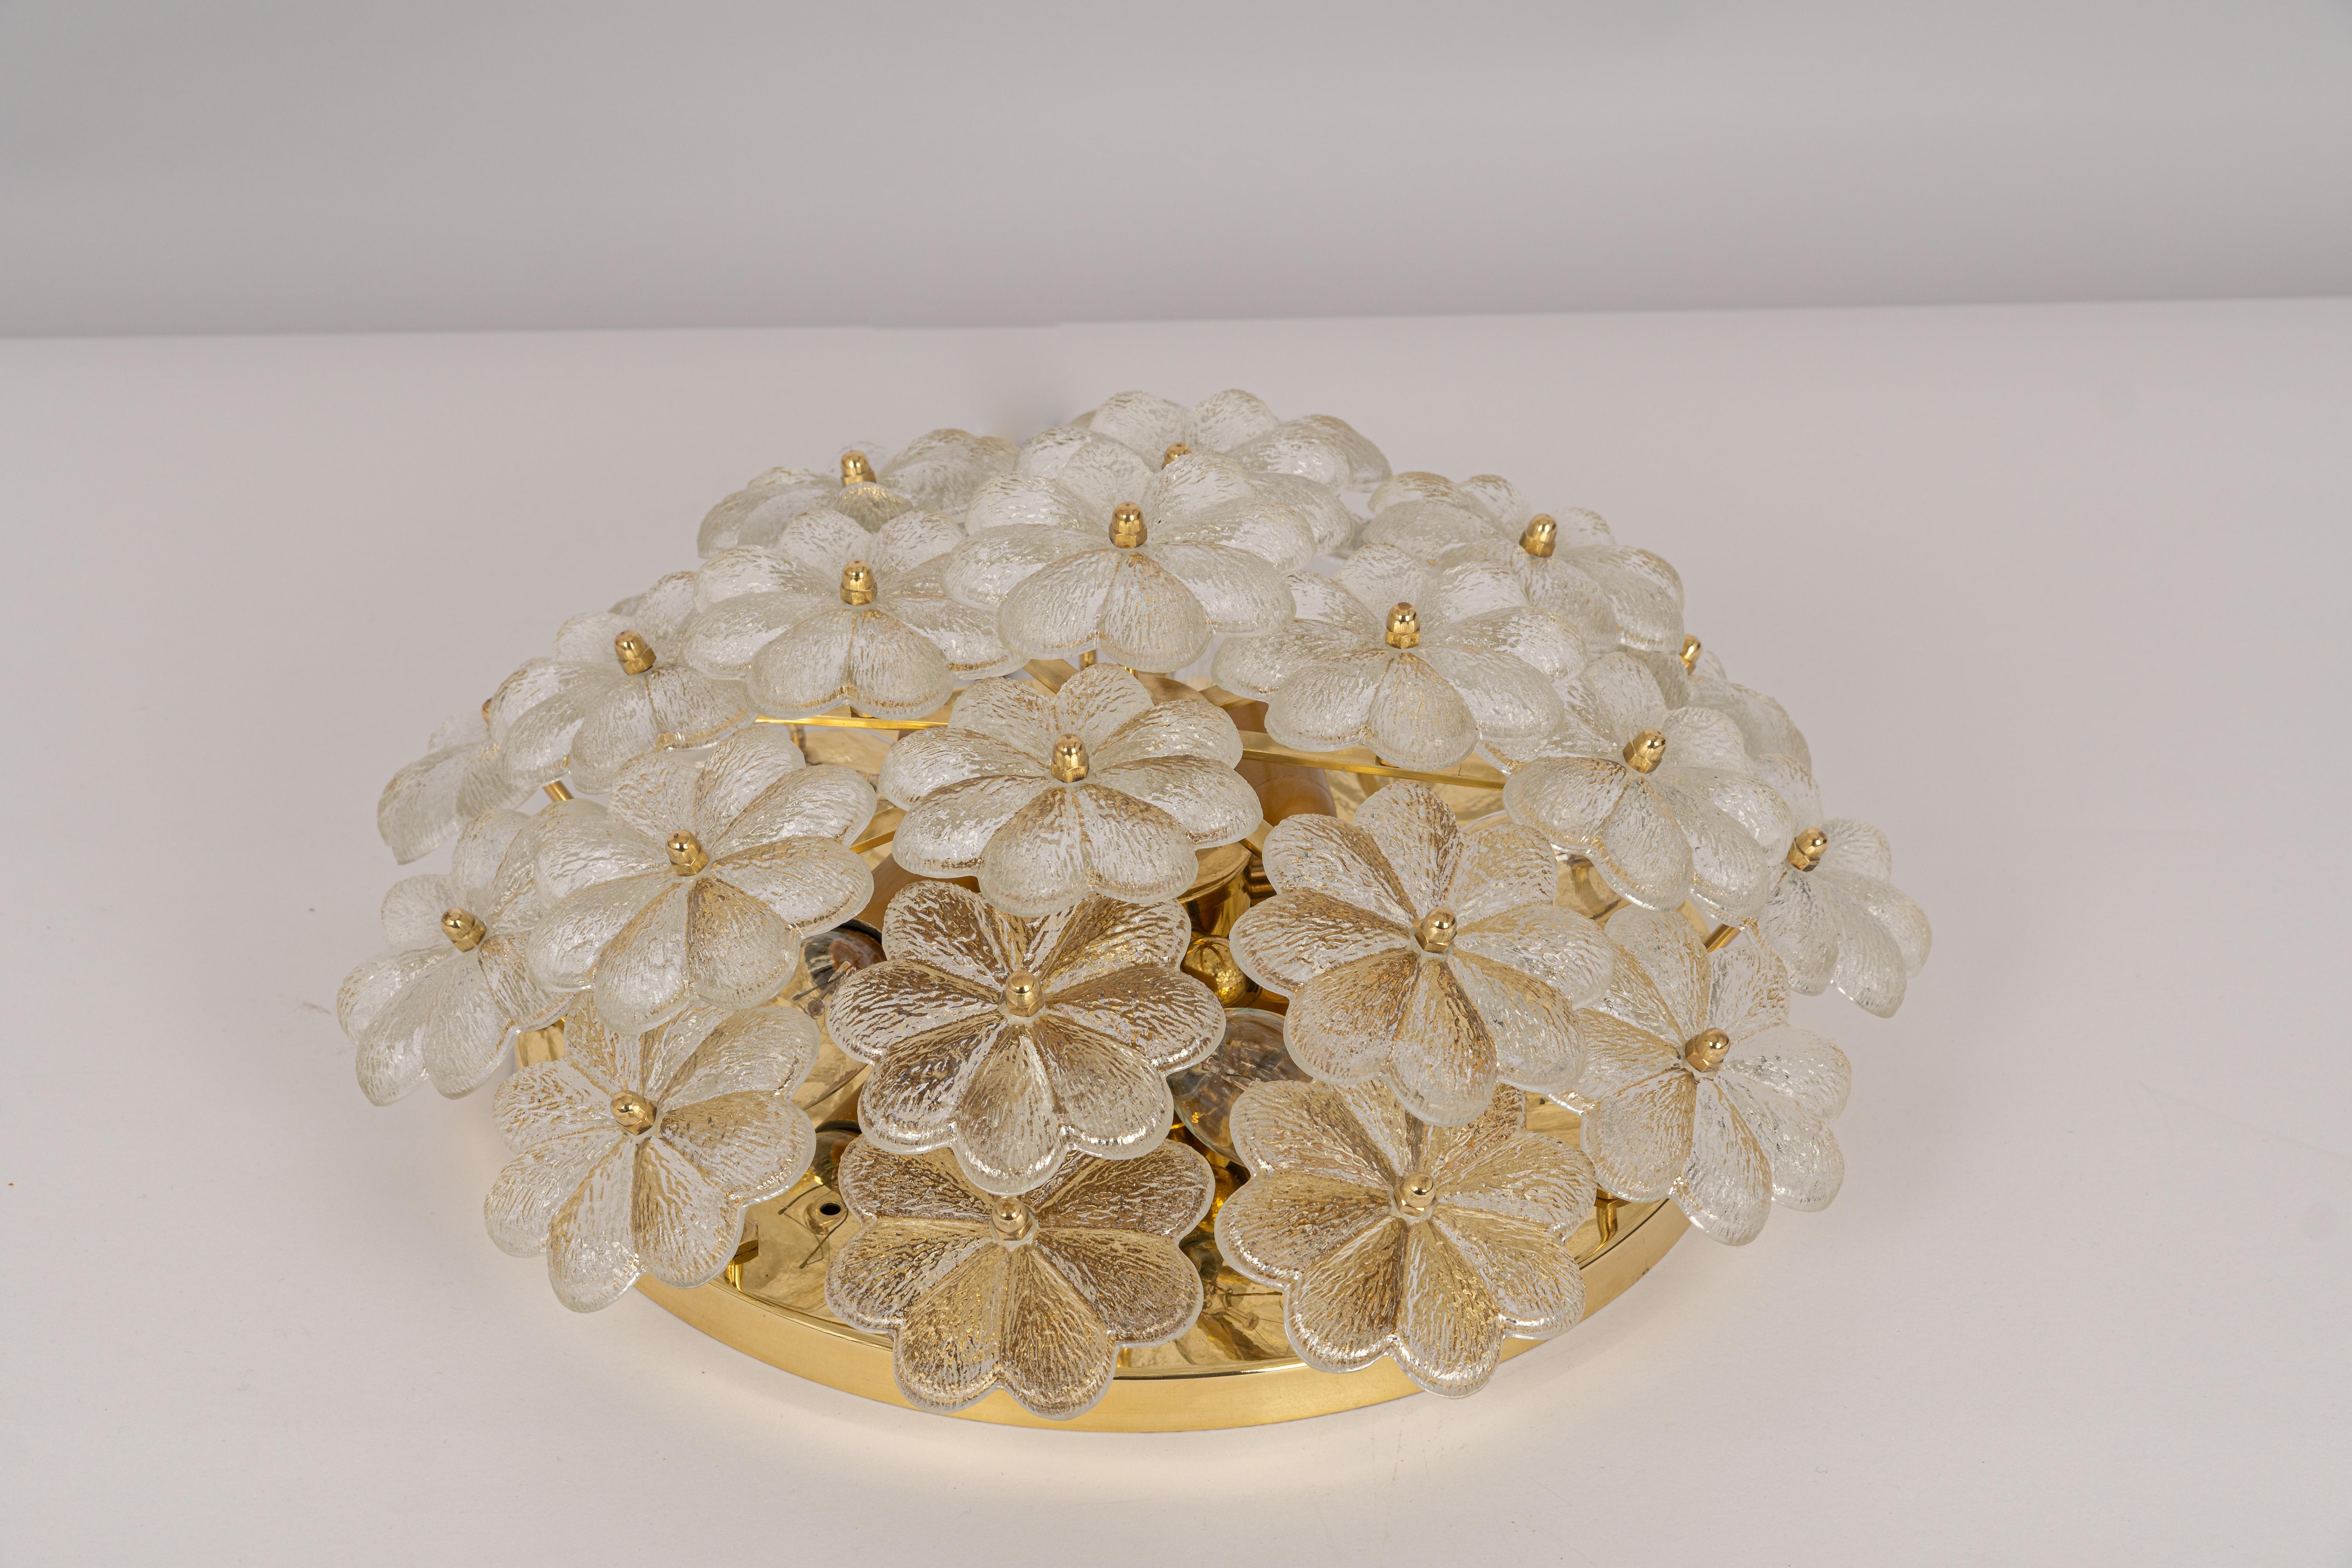 Midcentury flush mount light or wall sconce with 24 Murano glass flowers over a polished brass base, made by Ernst Palme in Germany, 1970s
Wonderful light effect.
High quality and in very good condition. Cleaned, well-wired, and ready to use. 

The